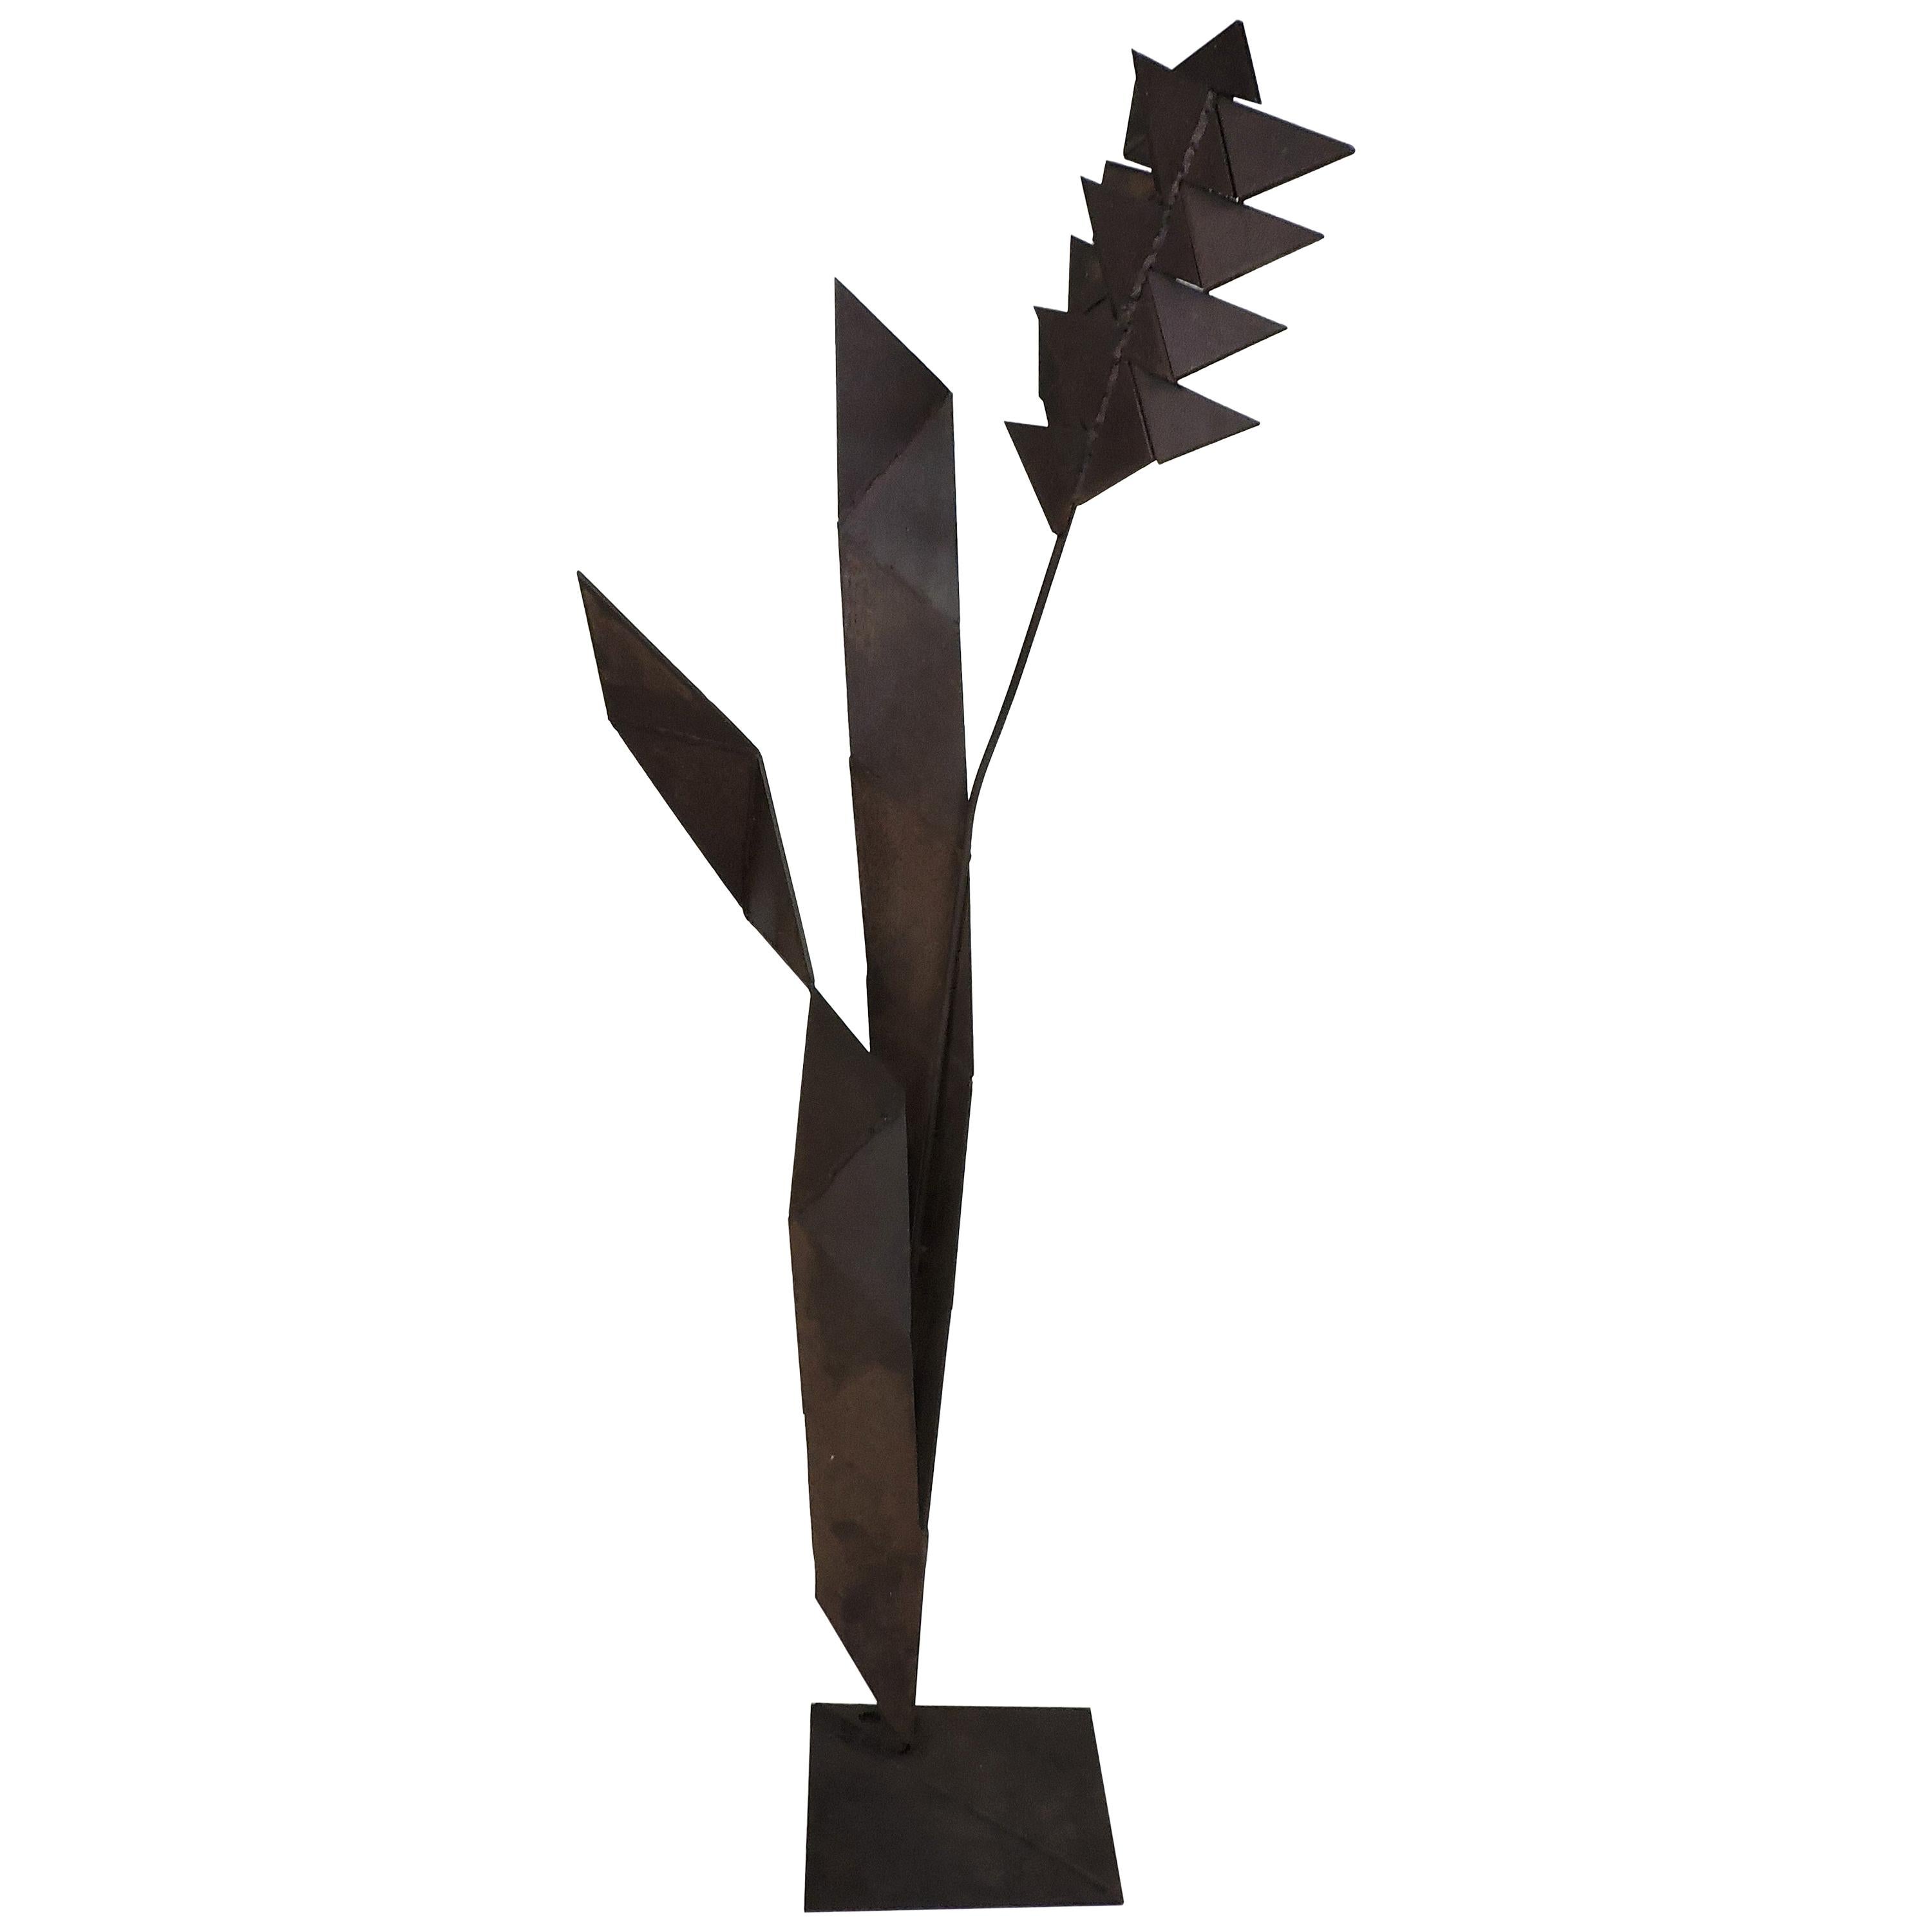 Large Abstract Welded Steel Sculpture "Wheat" by David Tothero